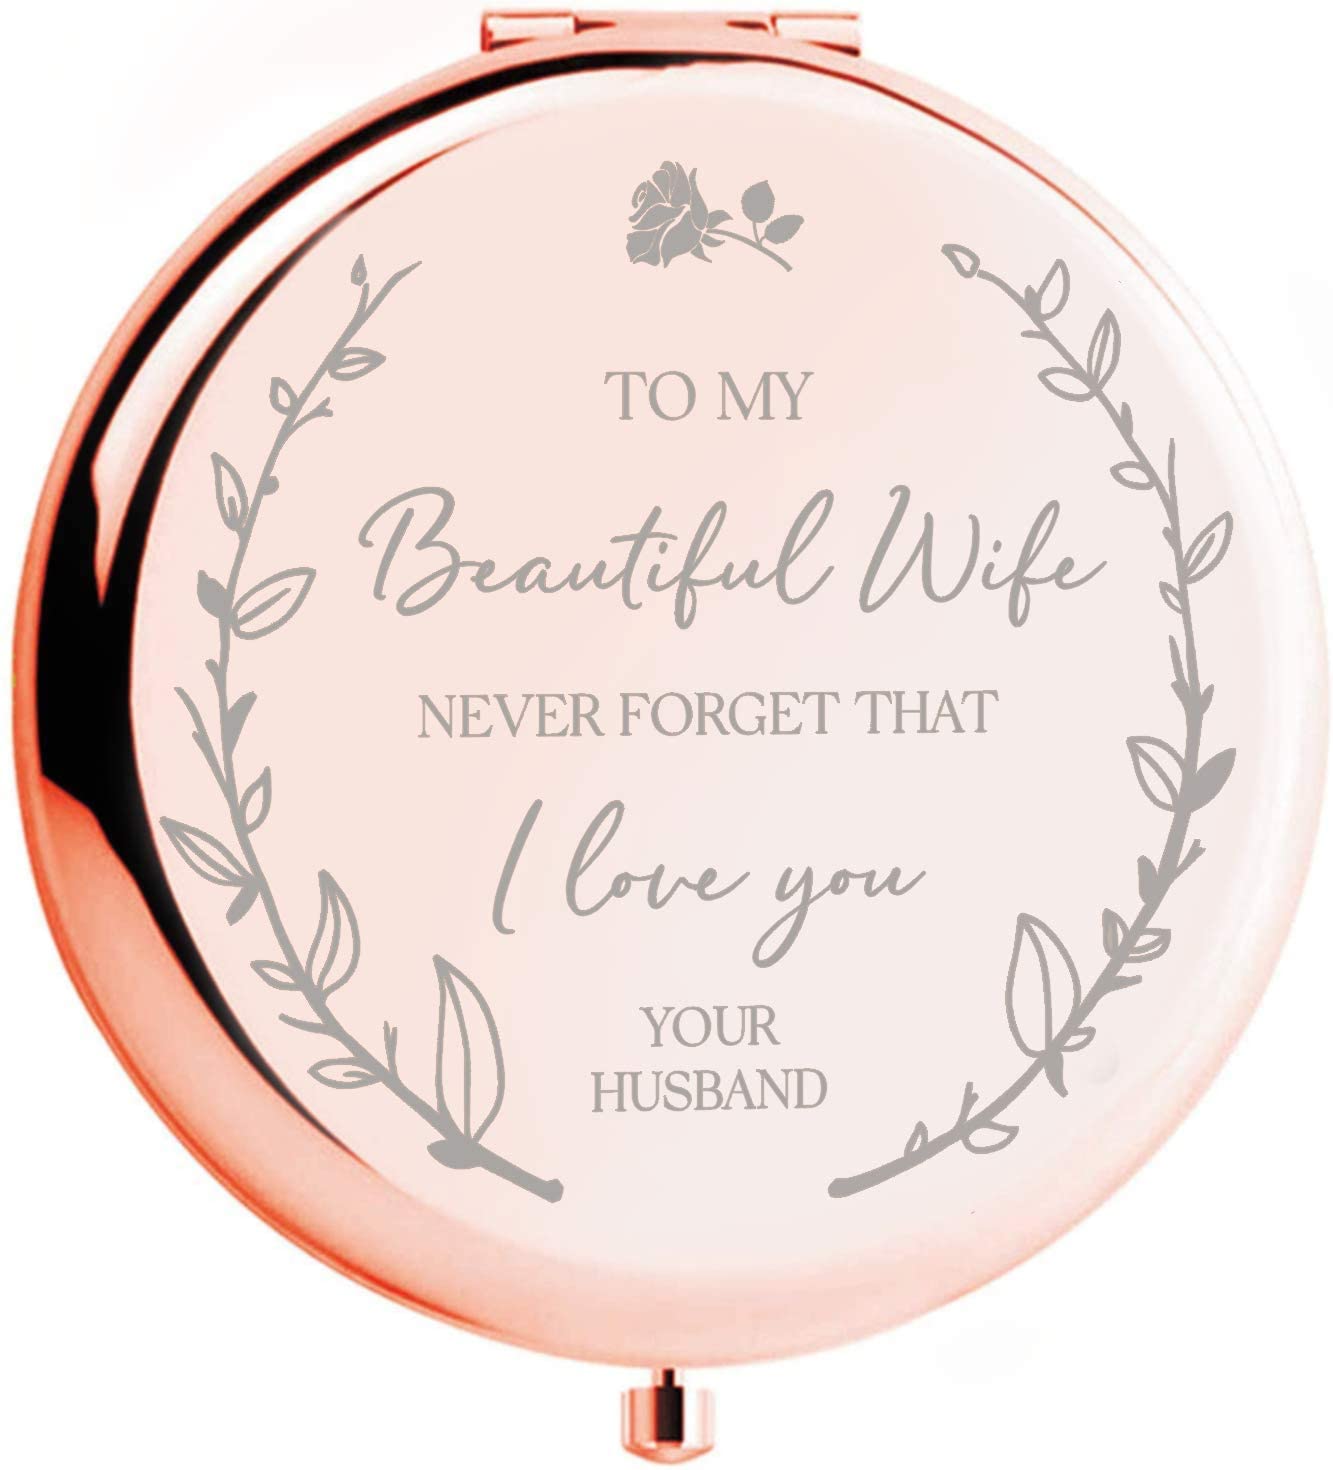 15 Romantic Gift Ideas for Your Wife | Gift Help